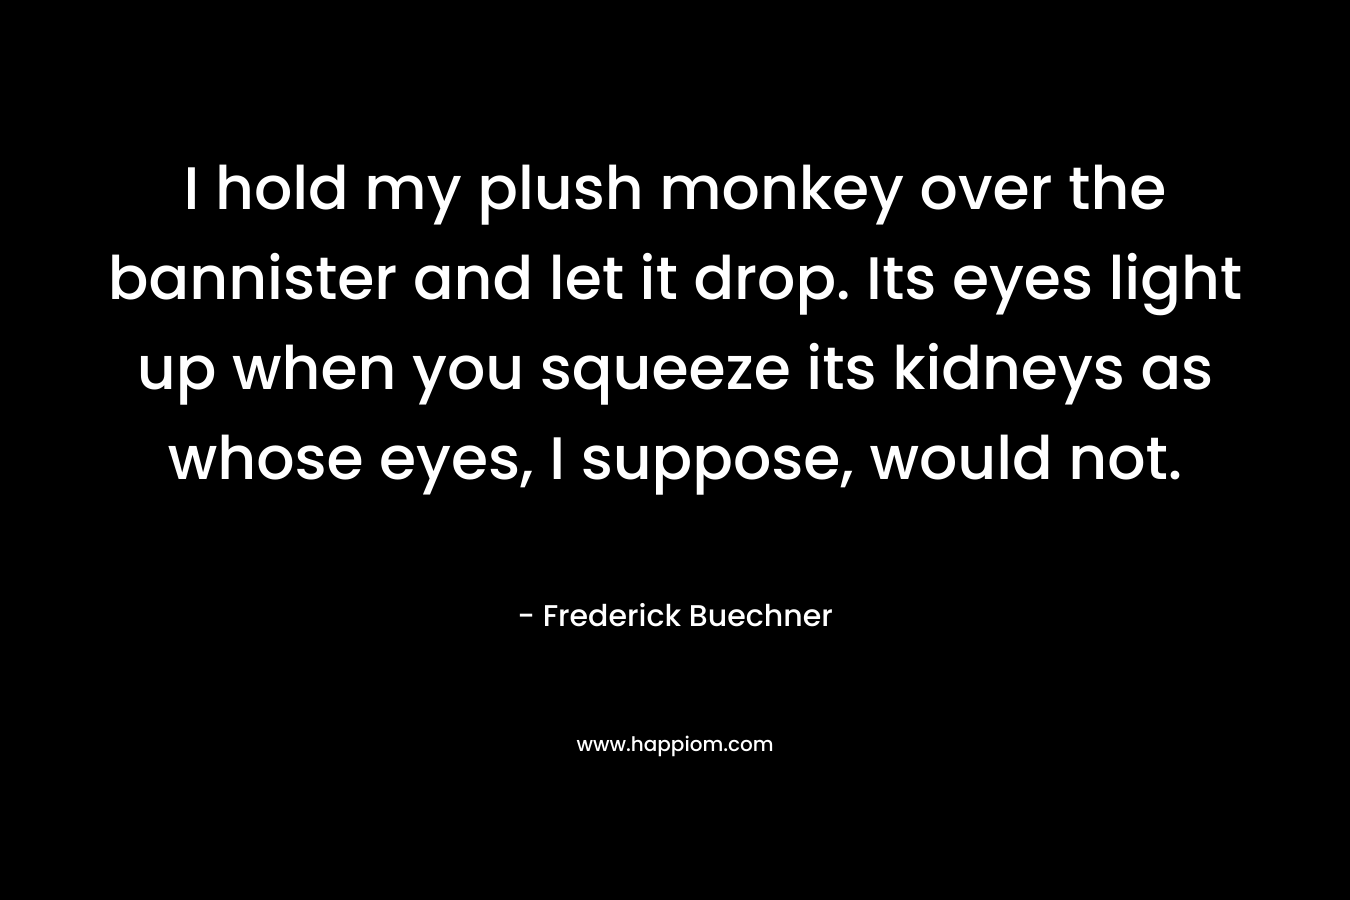 I hold my plush monkey over the bannister and let it drop. Its eyes light up when you squeeze its kidneys as whose eyes, I suppose, would not. – Frederick Buechner